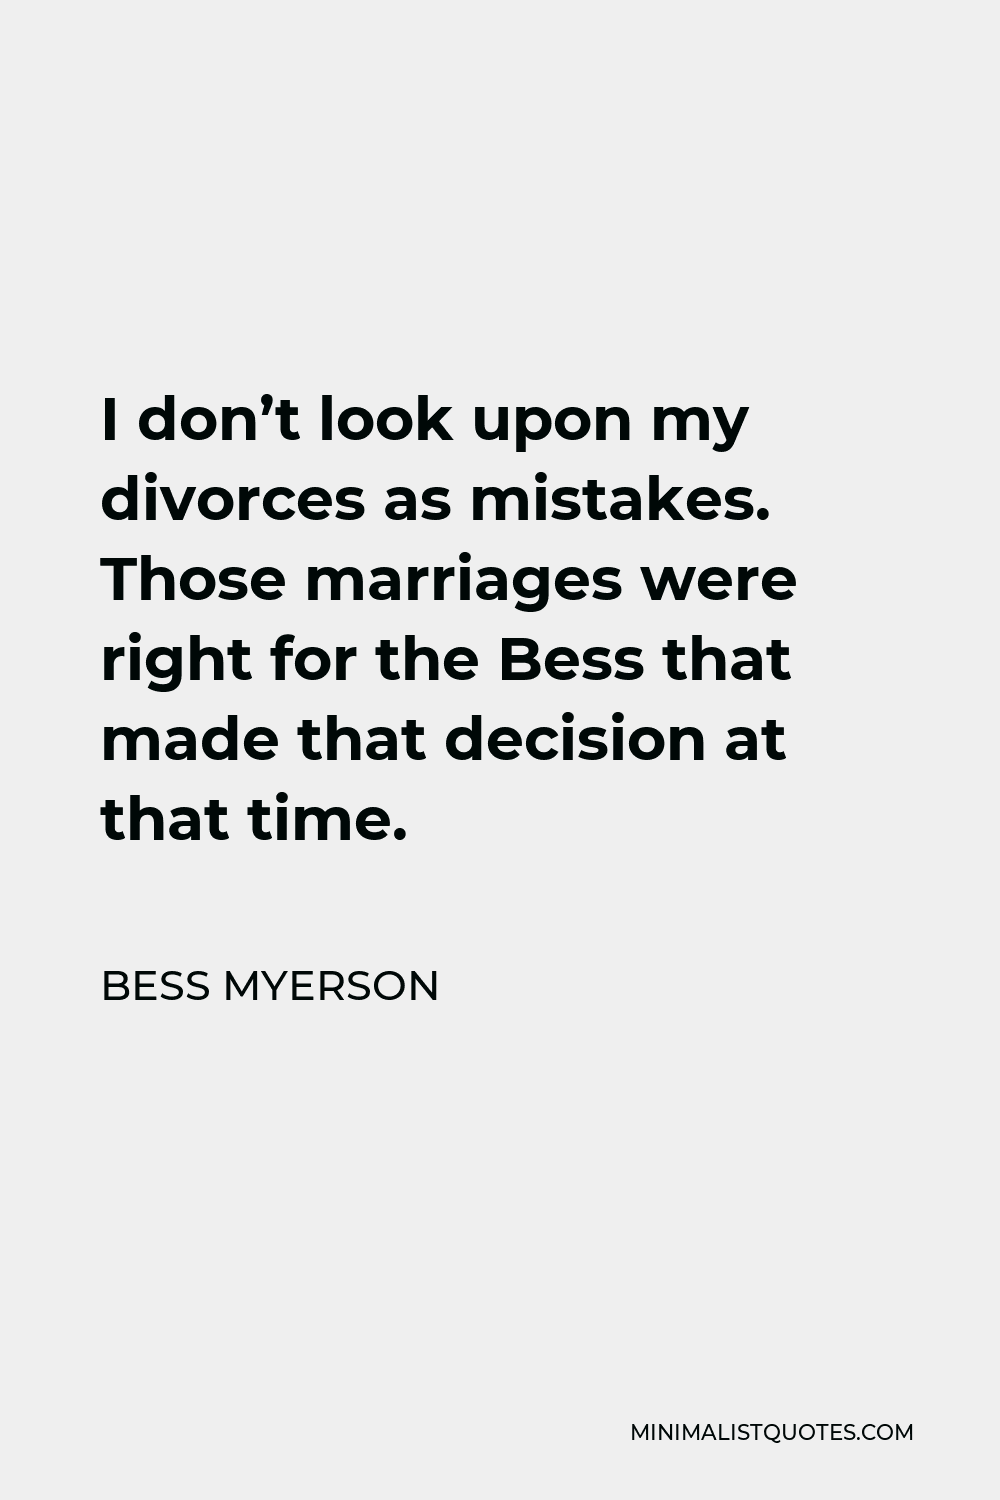 Bess Myerson Quote - I don’t look upon my divorces as mistakes. Those marriages were right for the Bess that made that decision at that time.